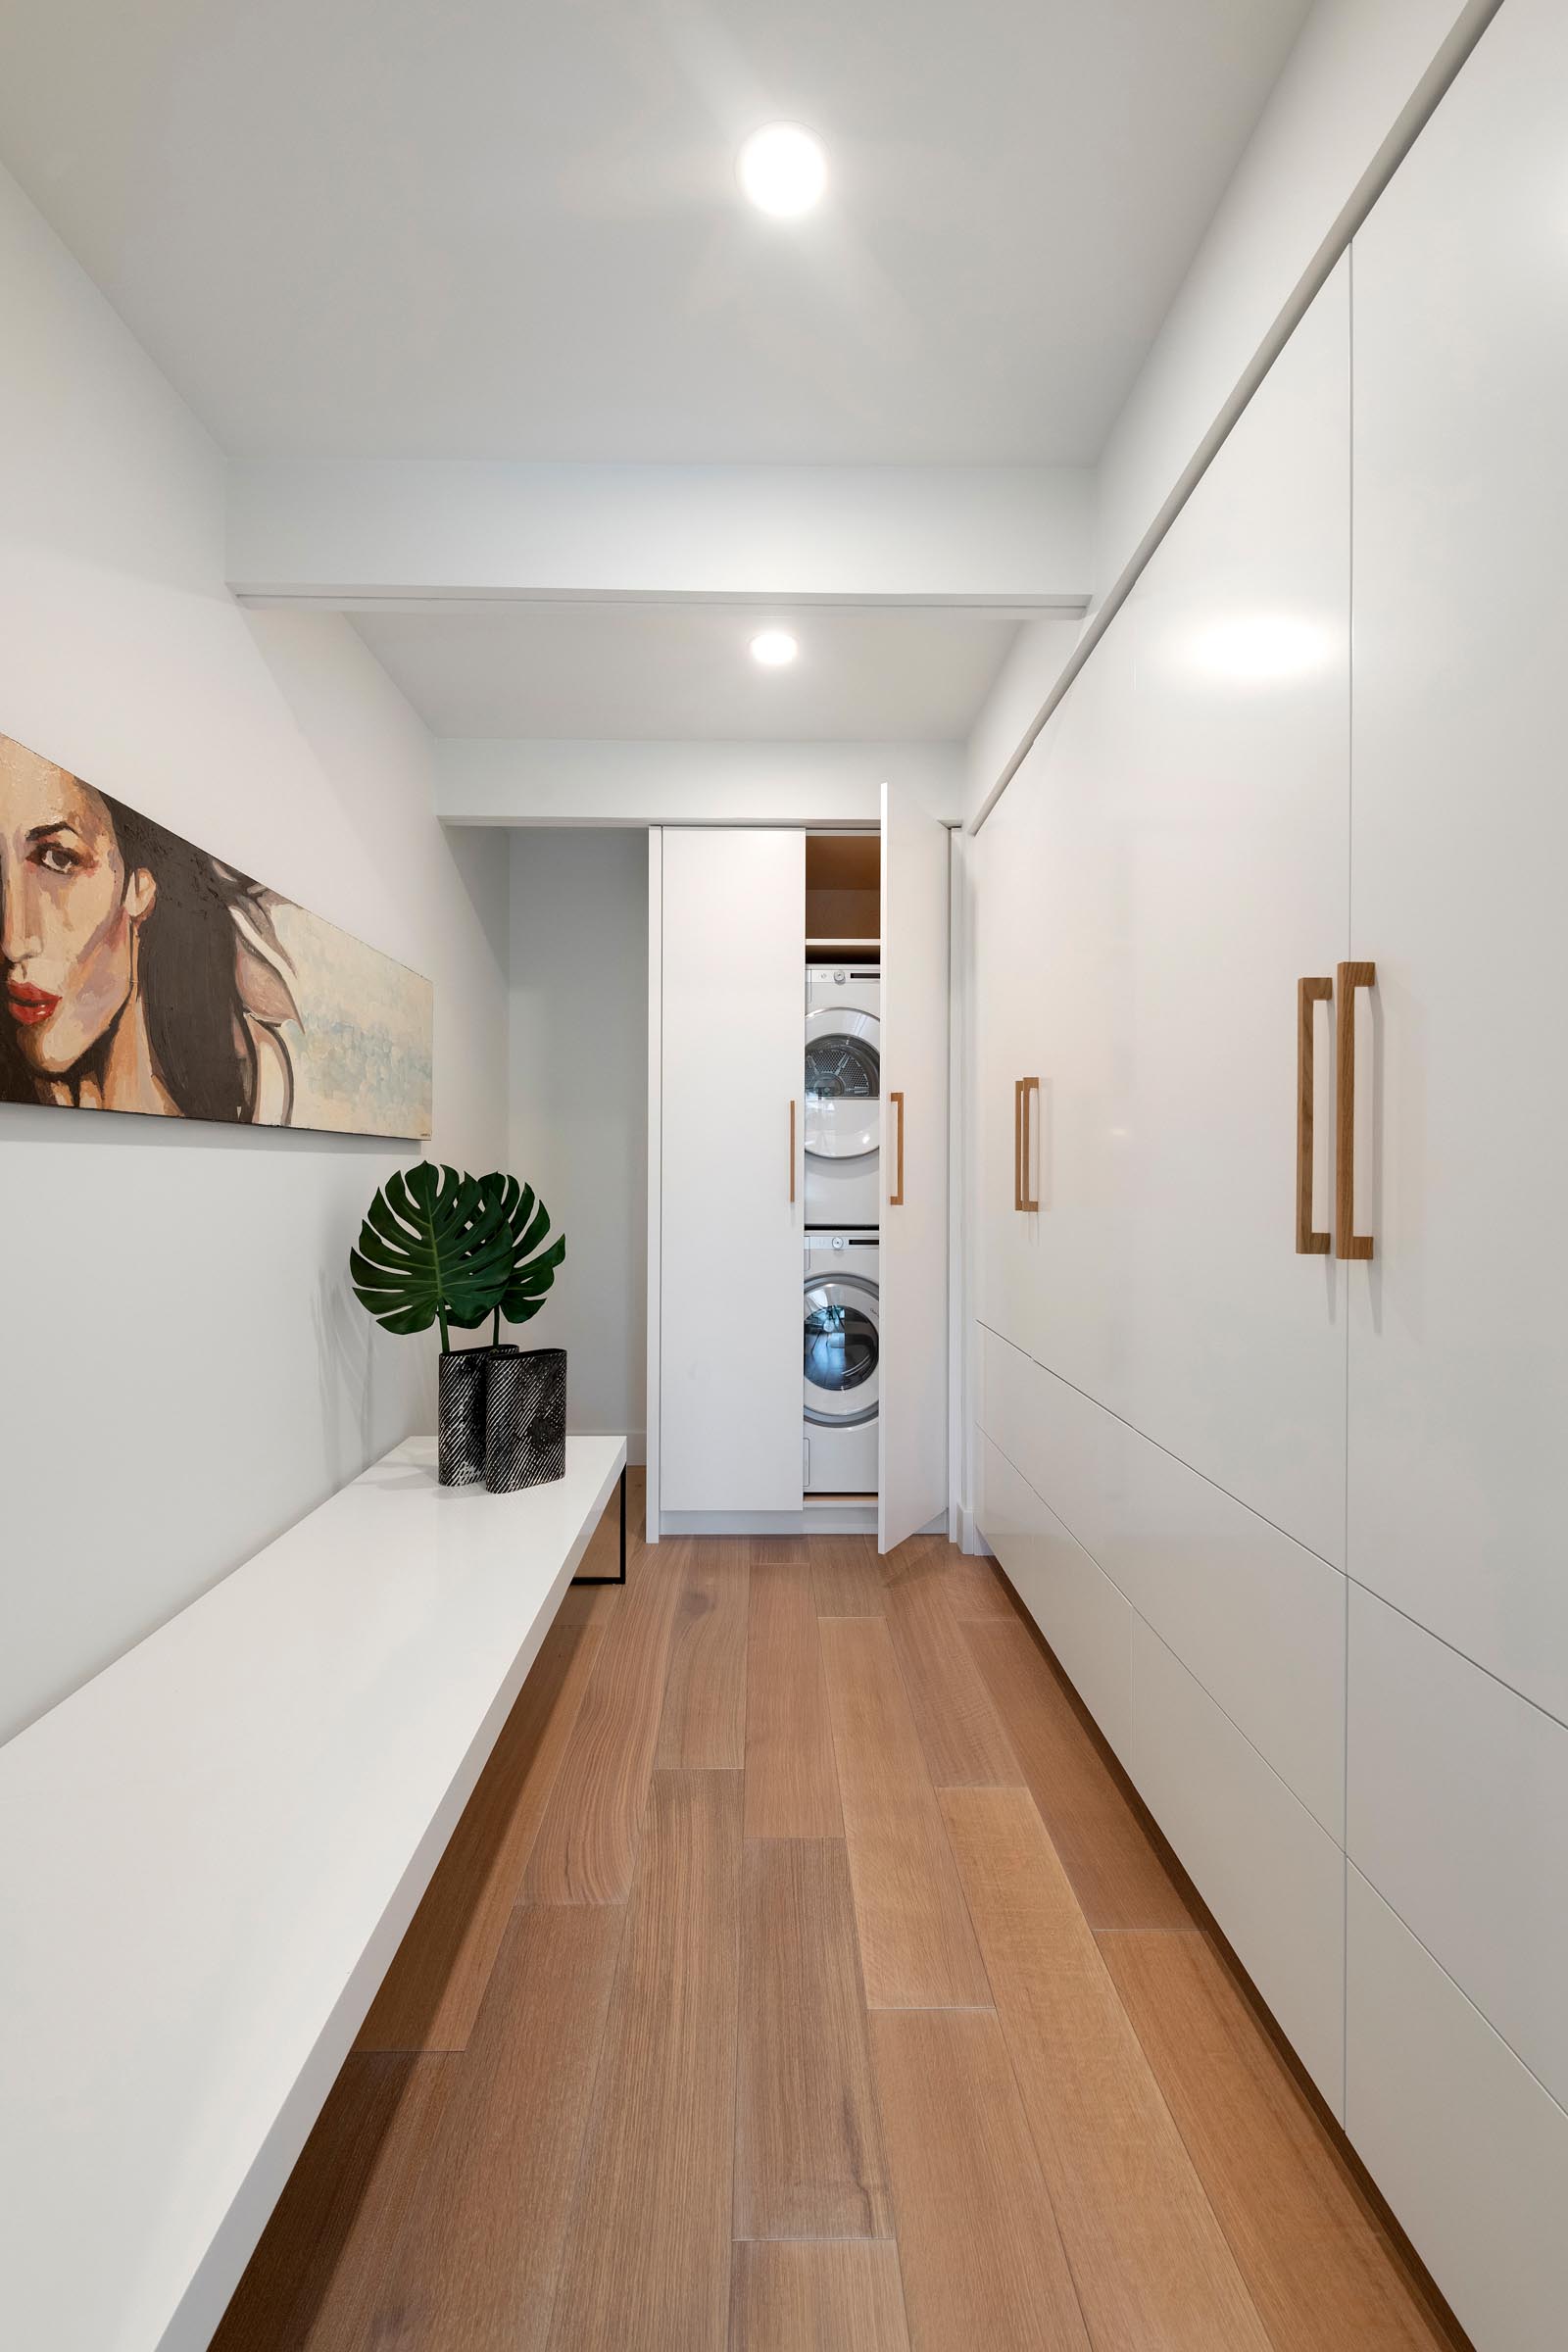 In this modern white laundry room, there's a long bench and wall of cabinetry with a washer and dryer hidden in the end cabinet.